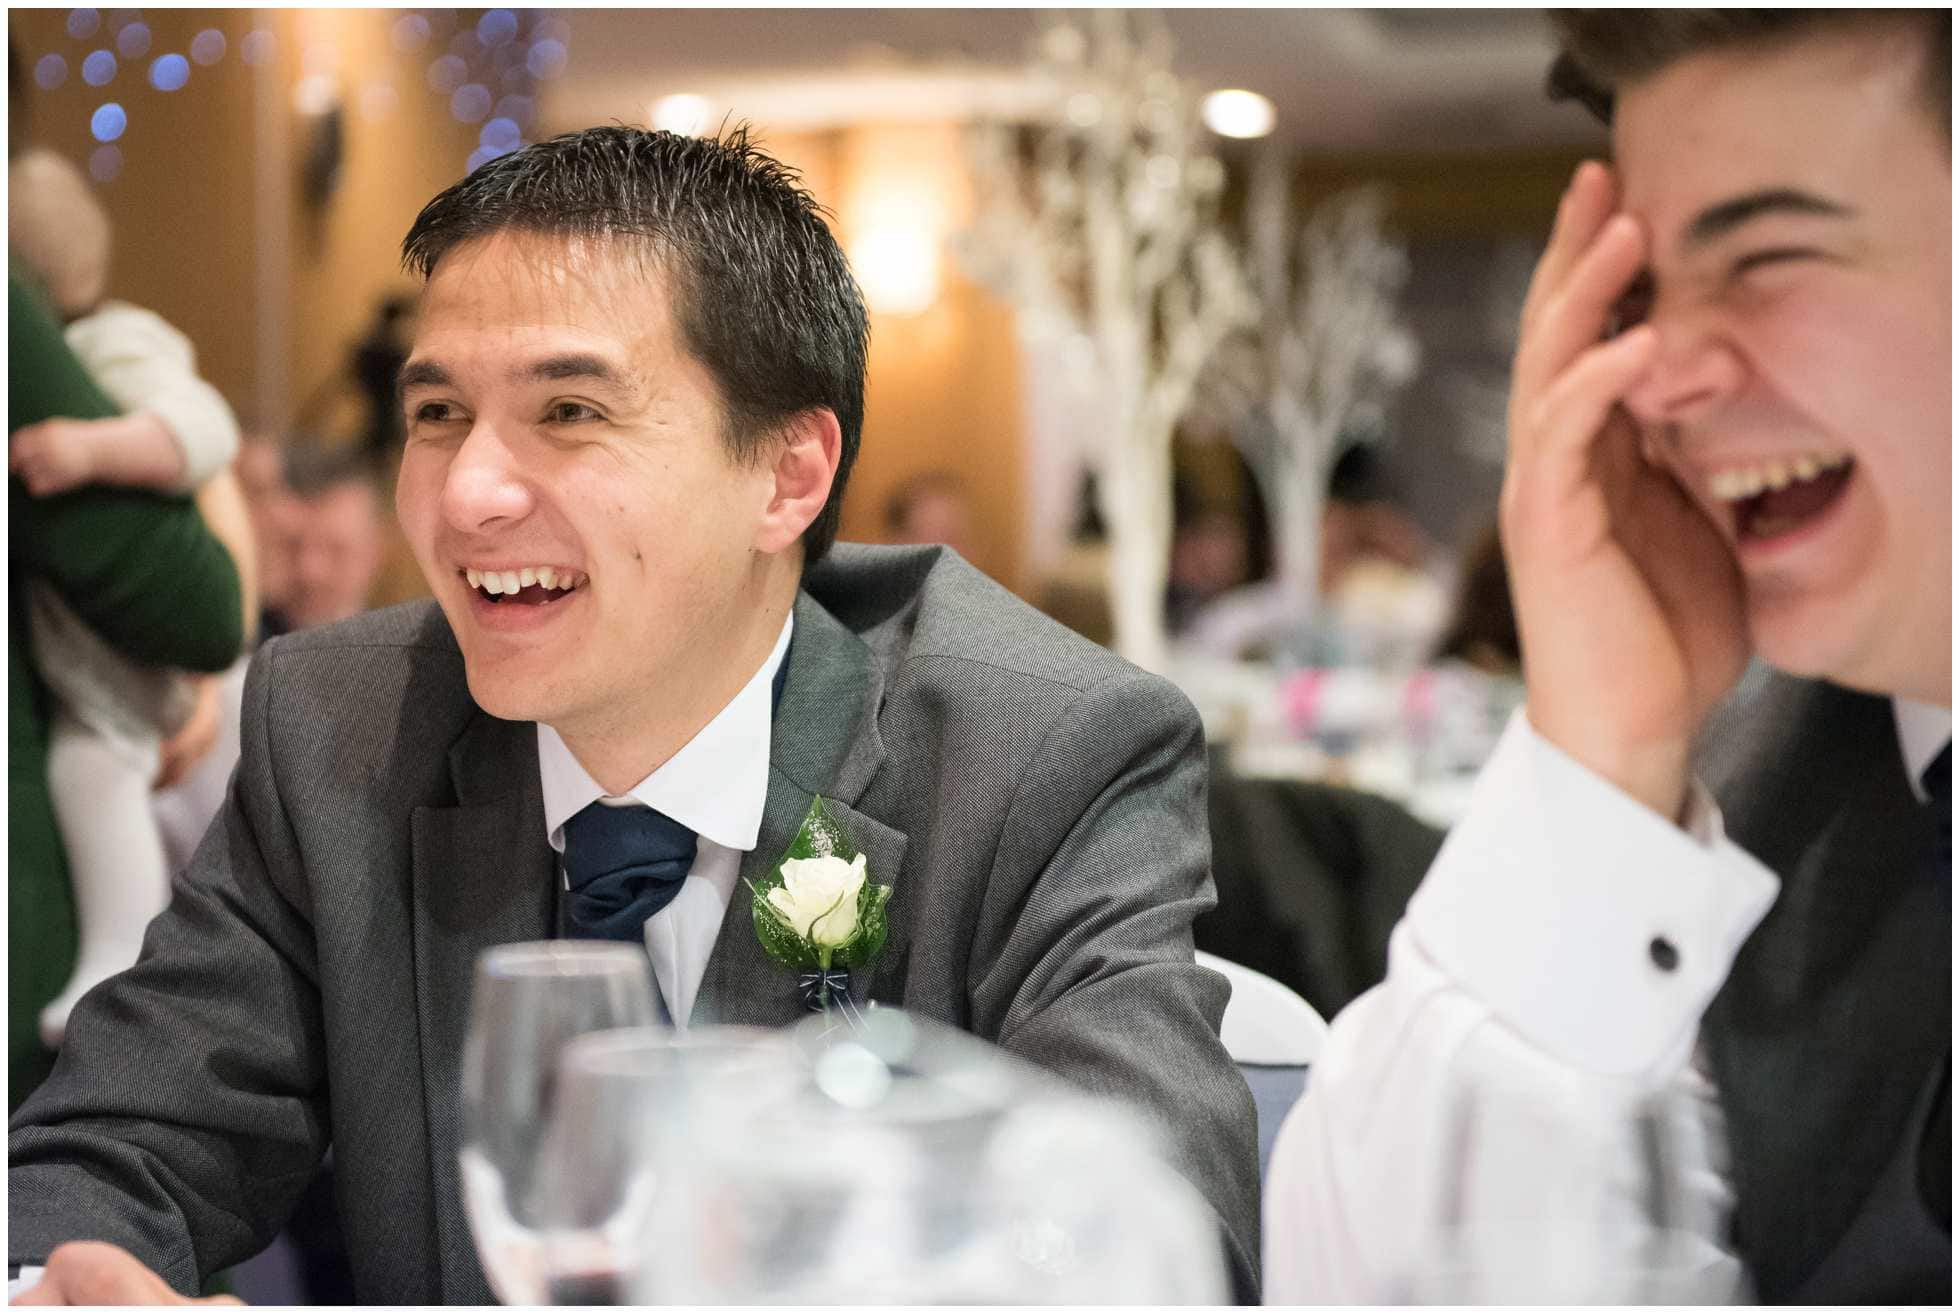 Fun and laughter at this York wedding